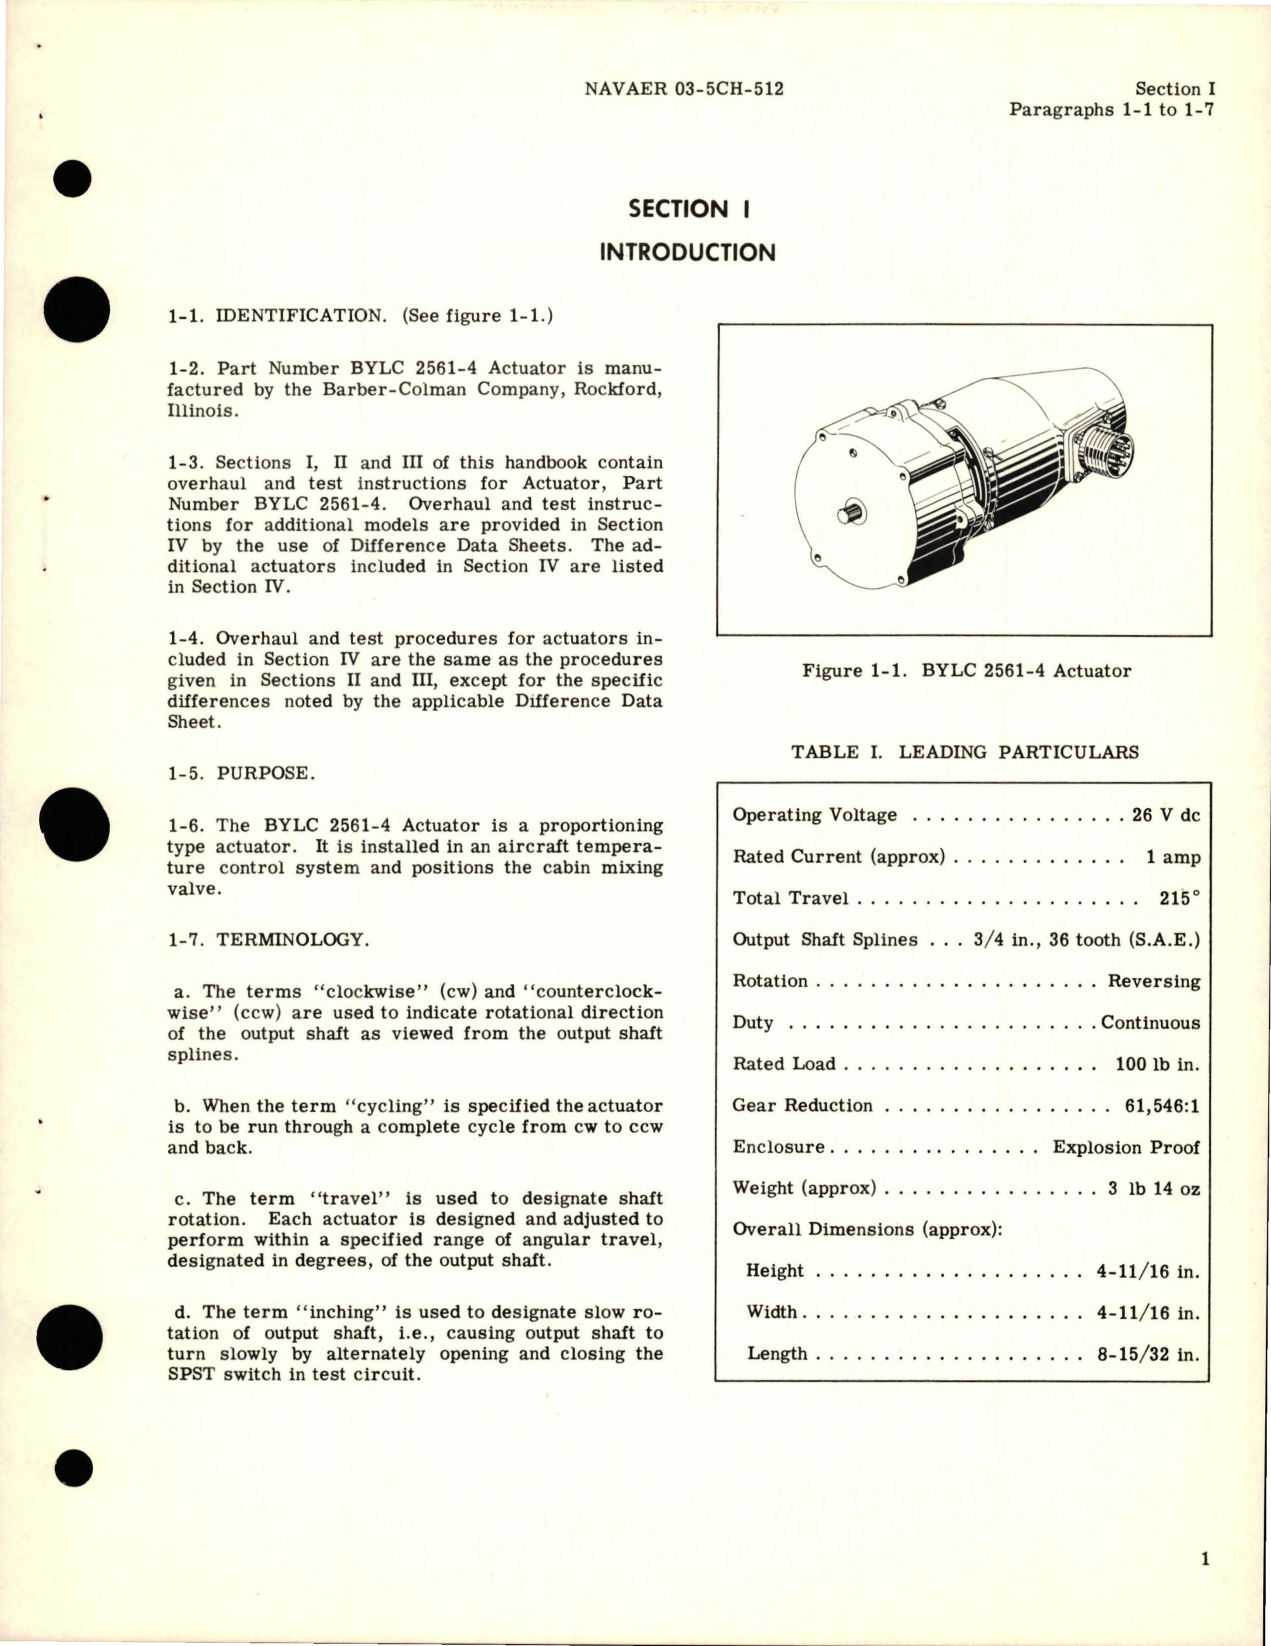 Sample page 5 from AirCorps Library document: Overhaul Instructions for Actuators - Parts BYLC 2561-4, BYLC 2218-1, and BYLC 2307-1